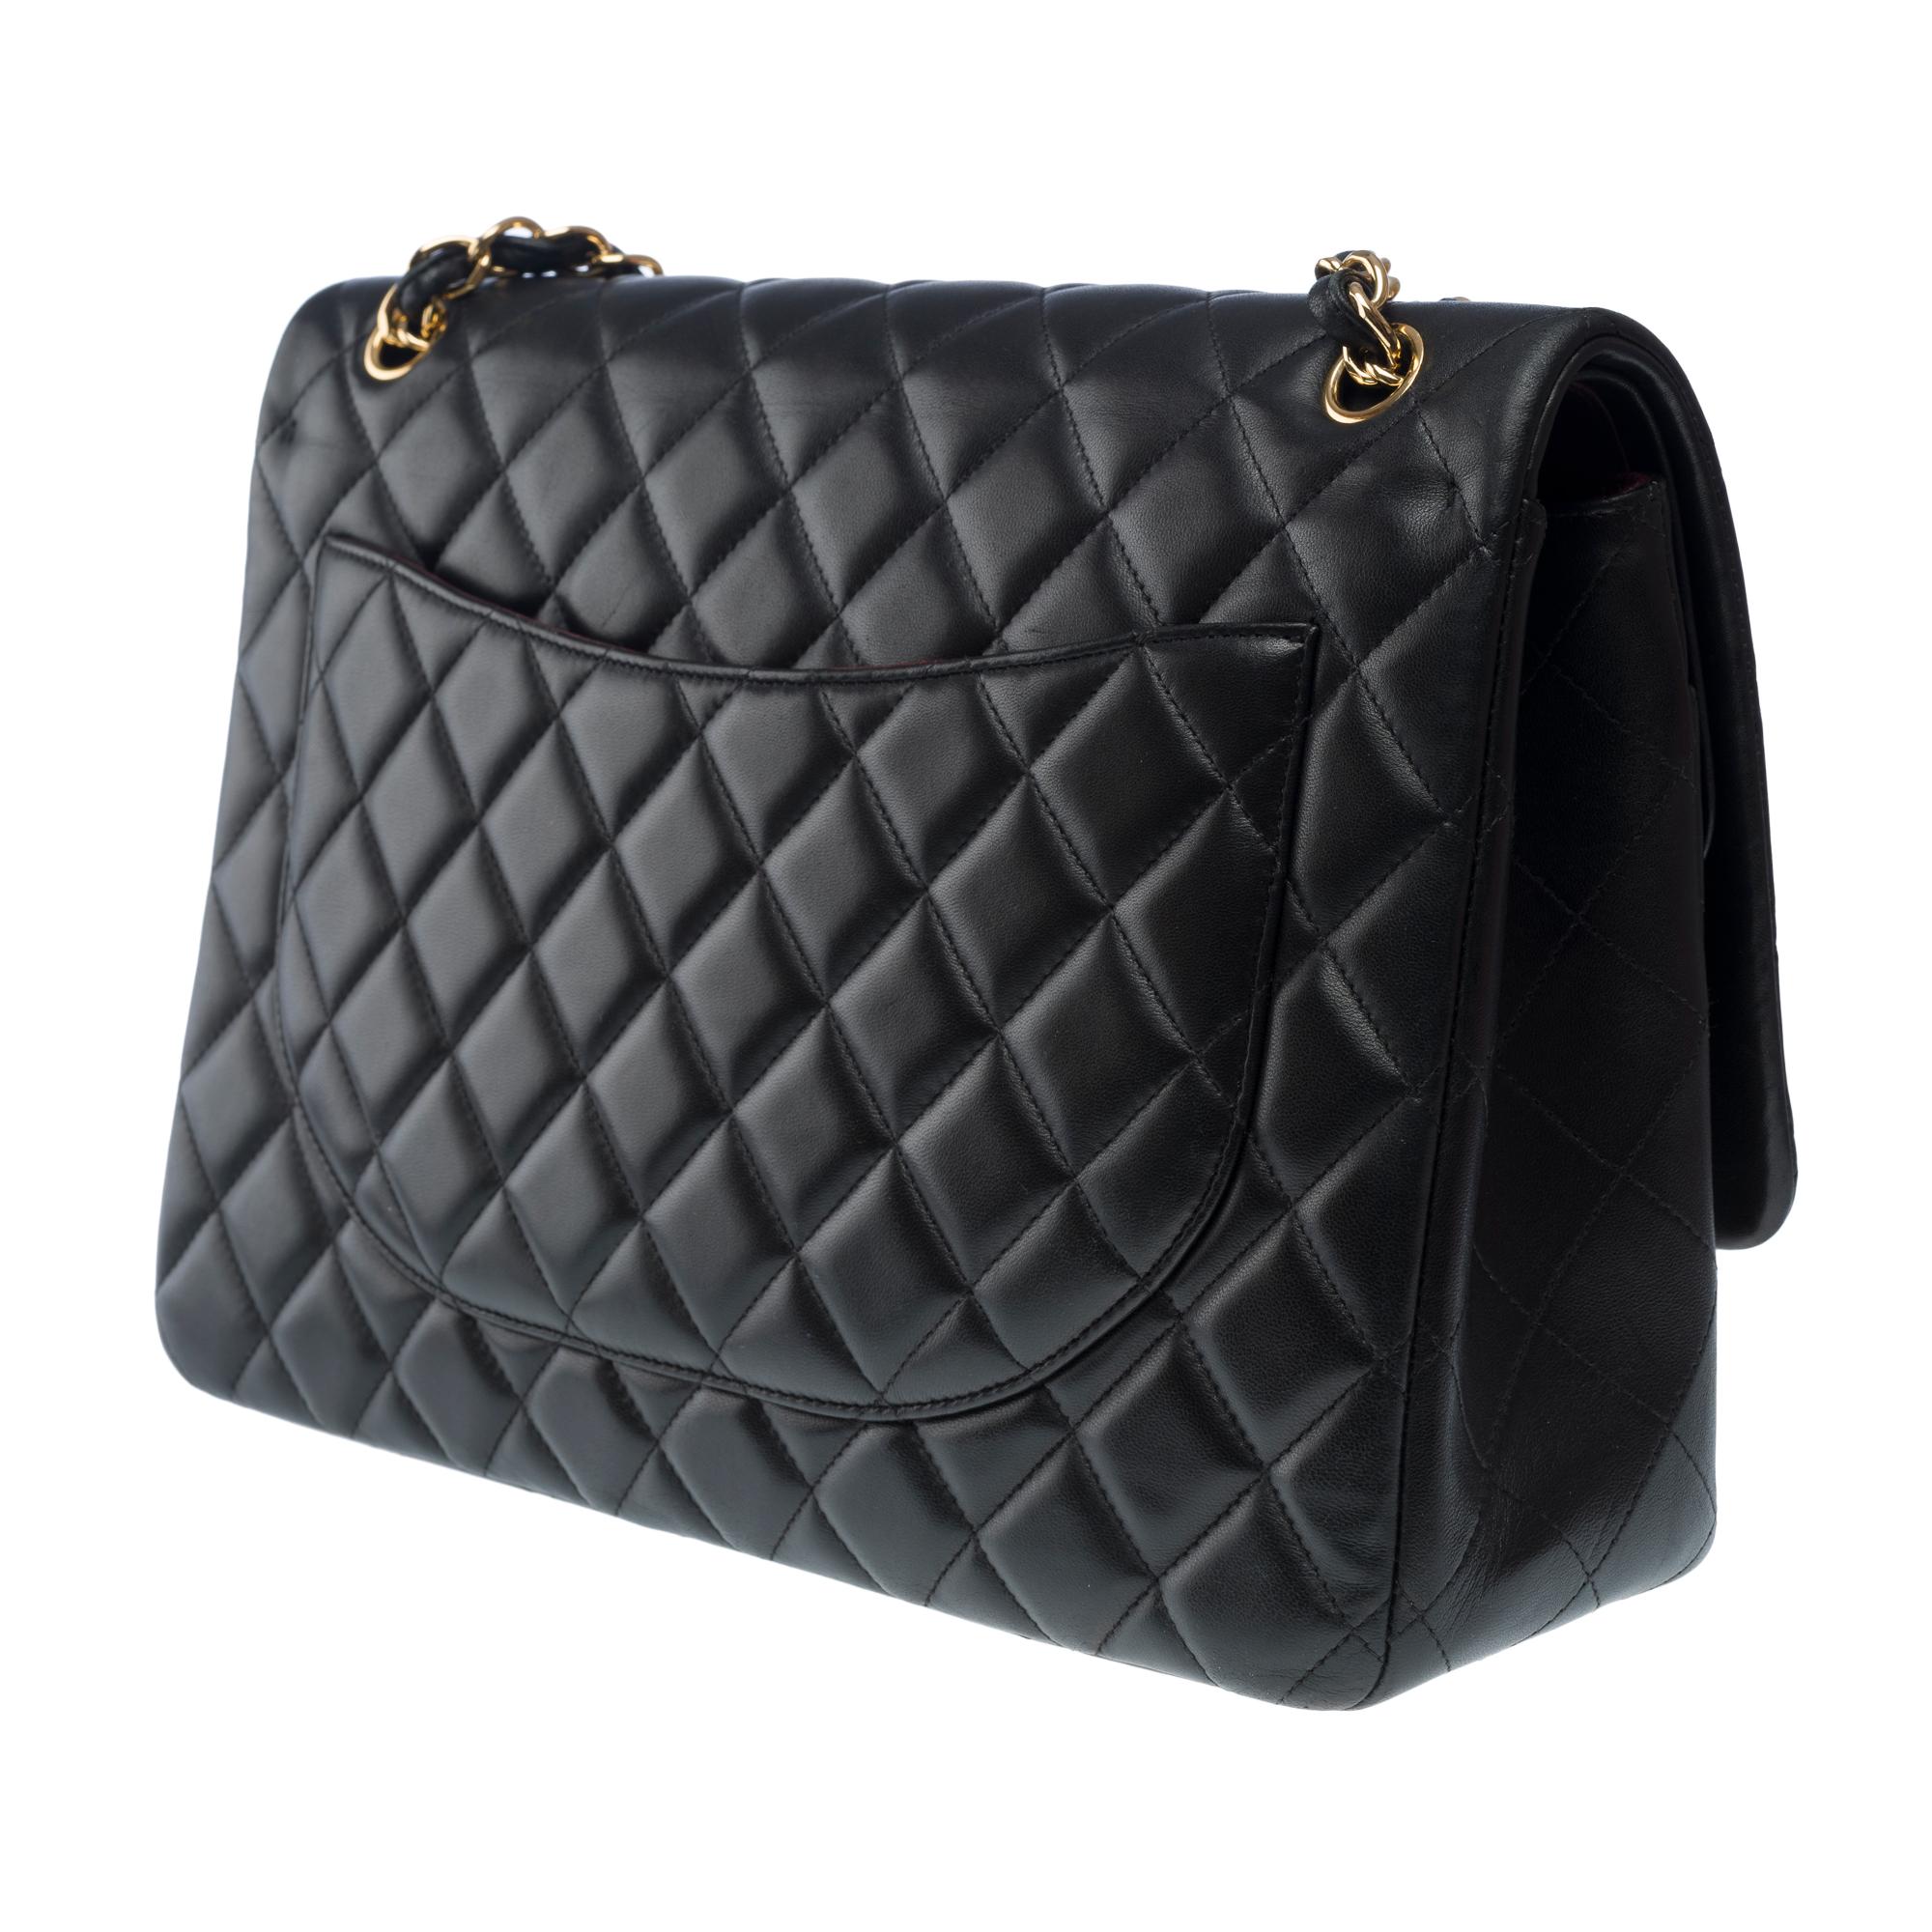 Chanel Timeless Maxi Jumbo double flap shoulder bag in Black quilted lamb, GHW For Sale 2